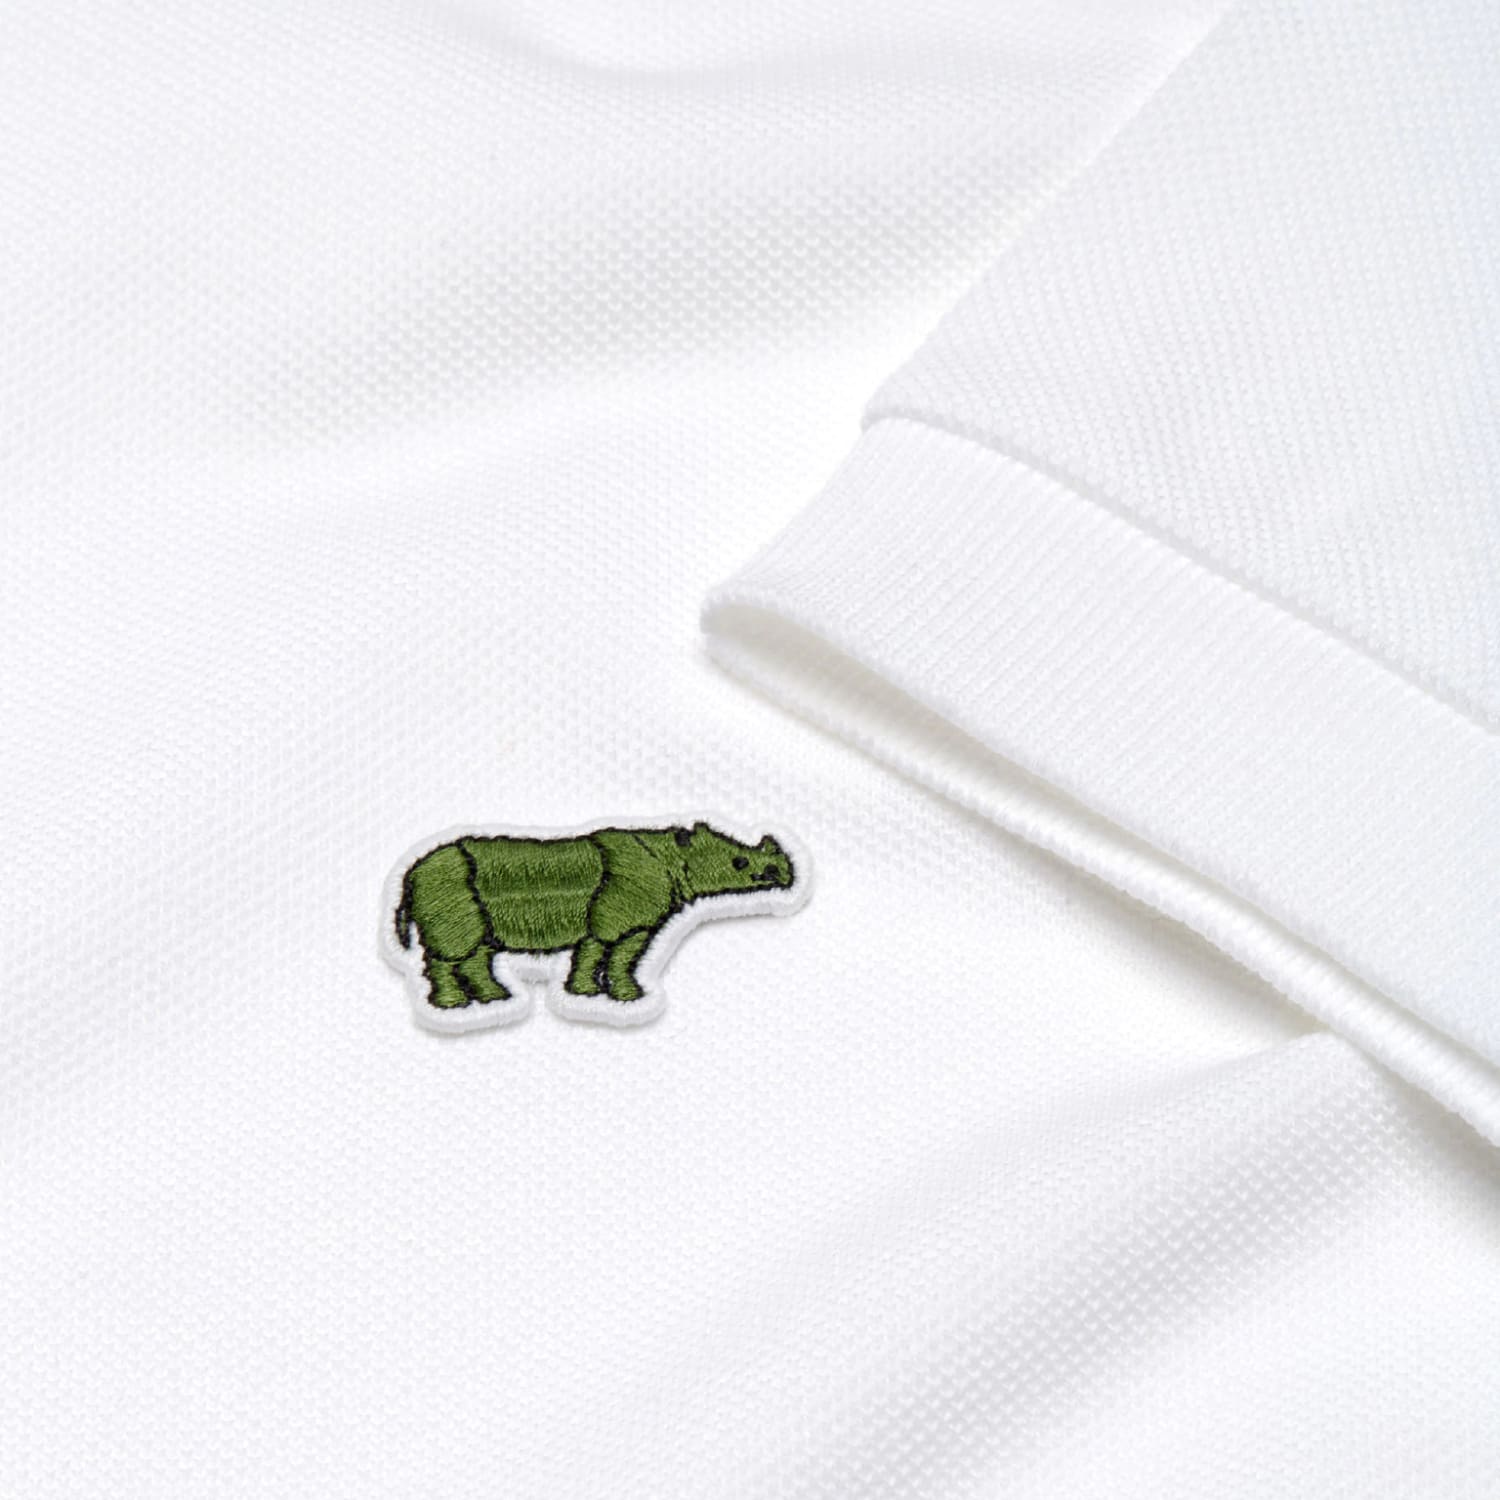 Lacoste replaces with endangered species